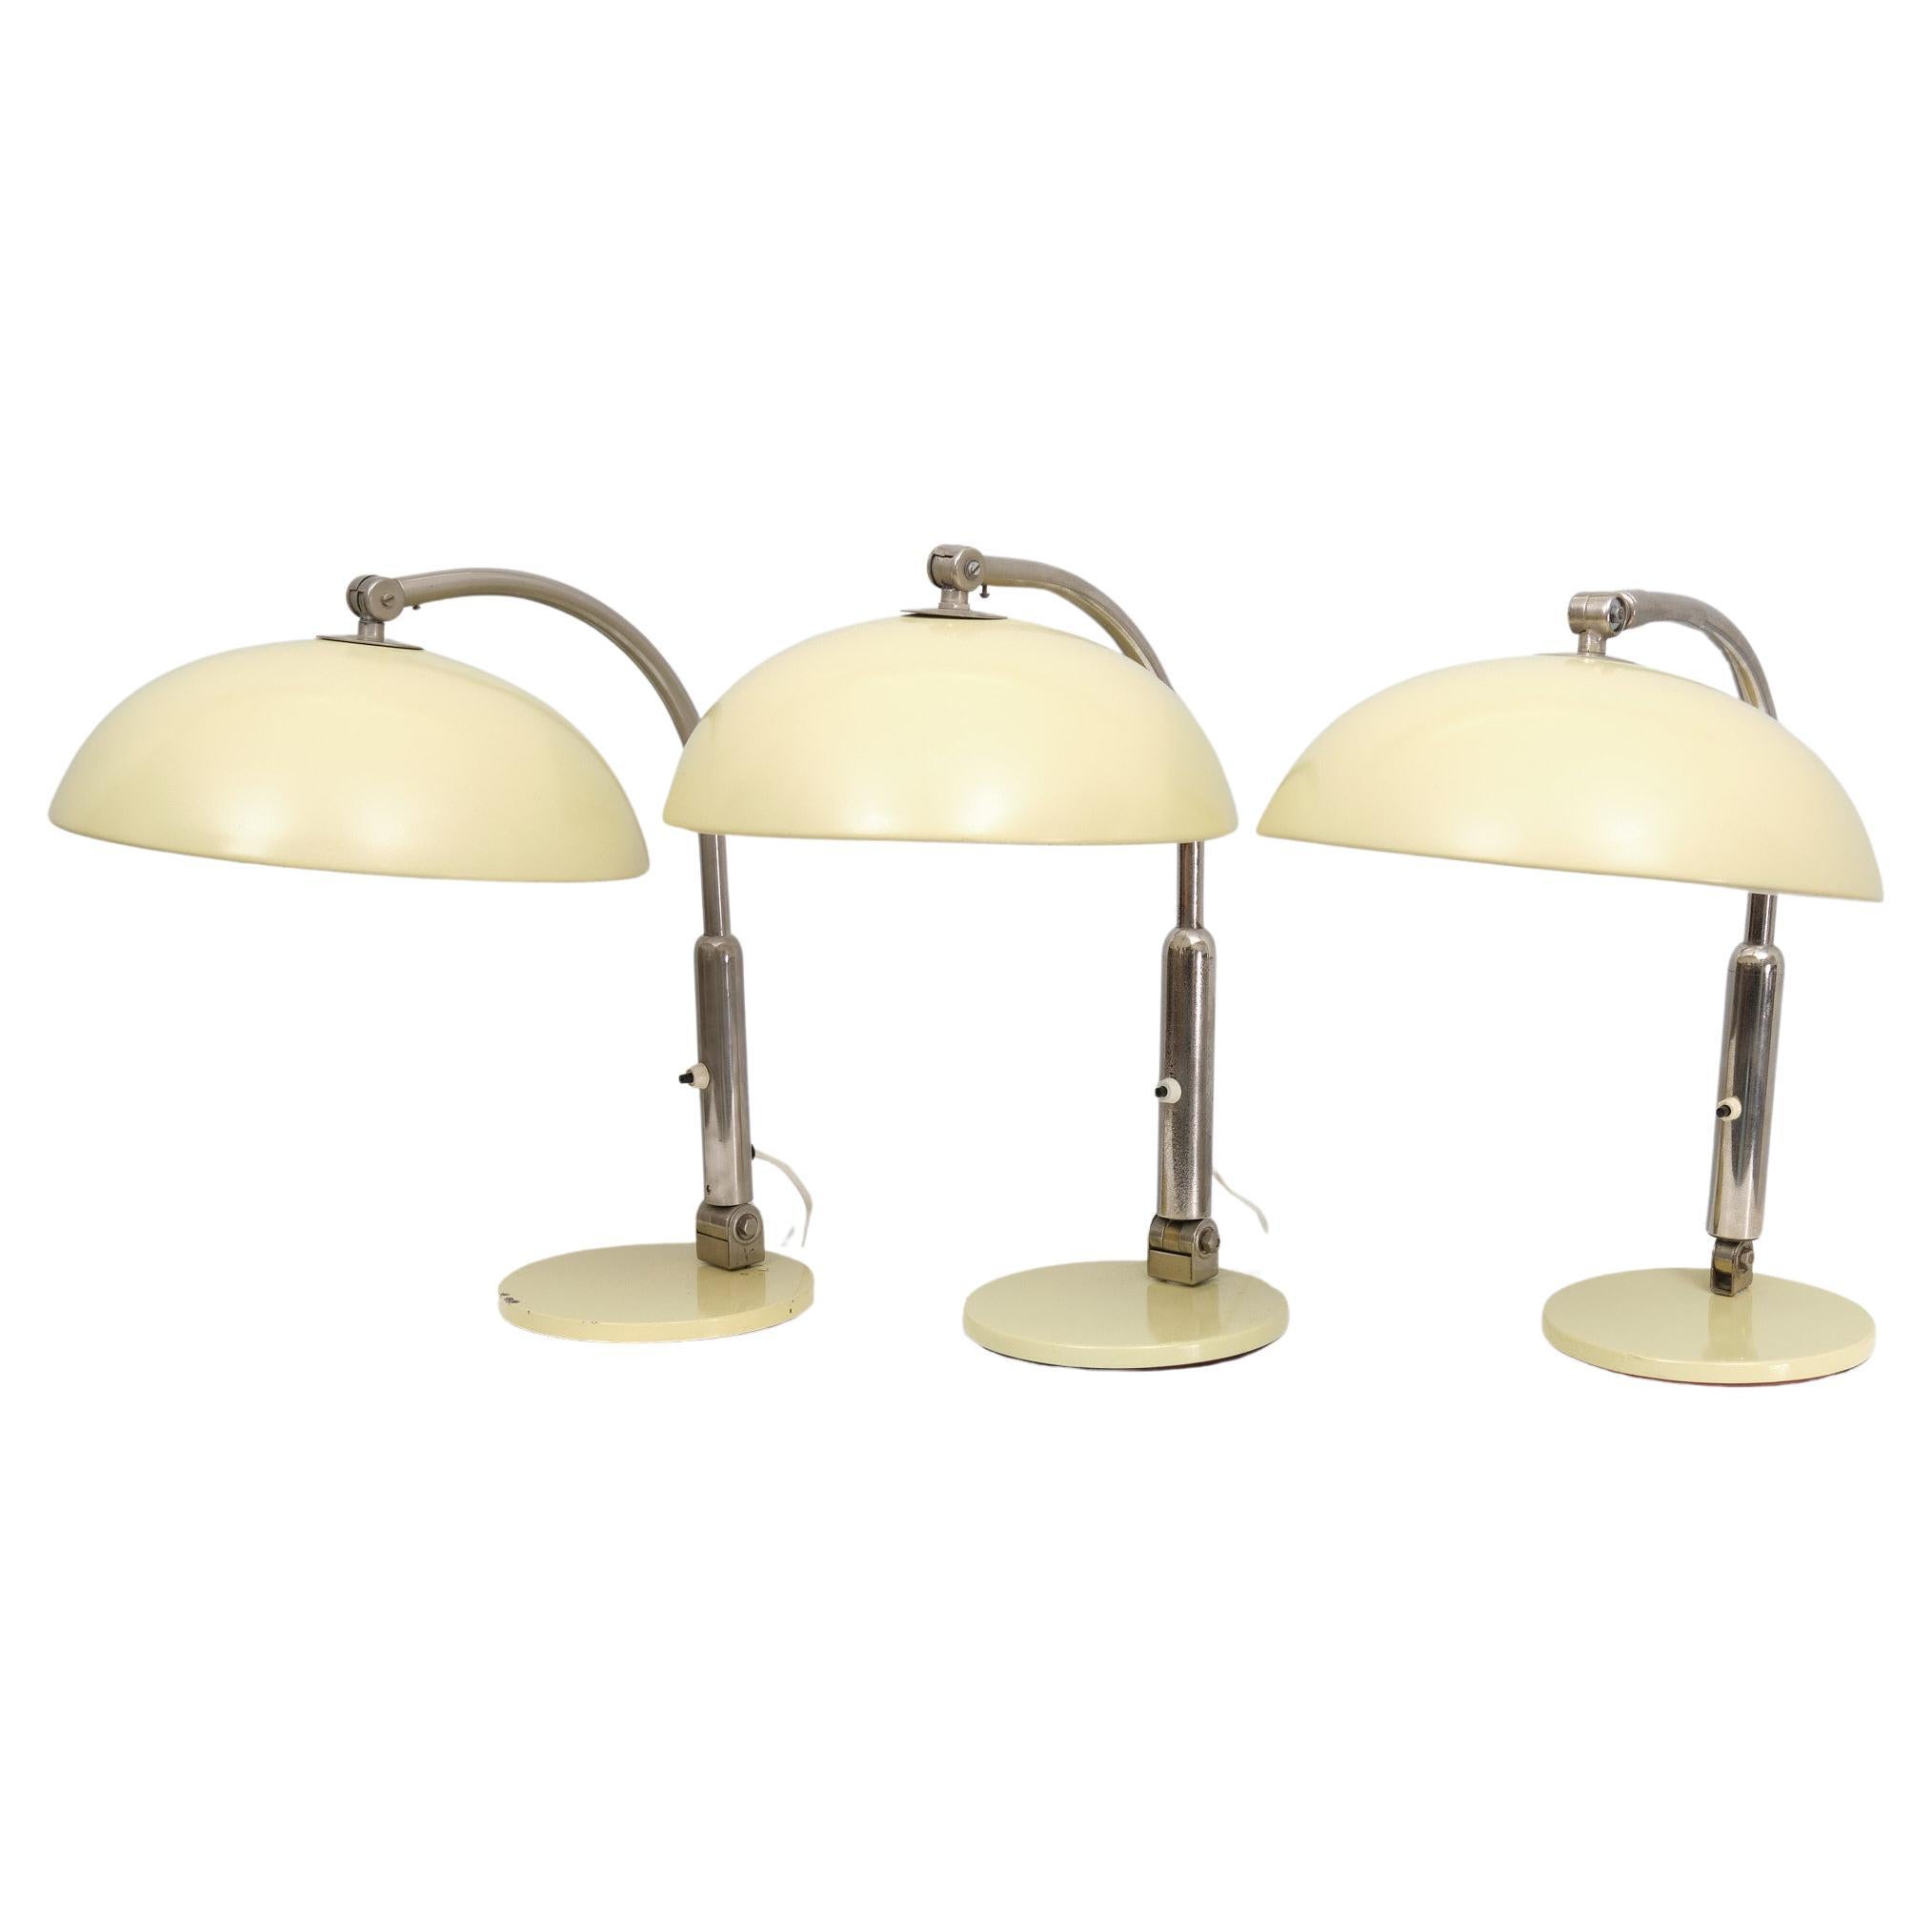 Unique set of Three identical Desk lamps .Manufactured by Hala Zeist 
Design by Herman Theodoor Jan Anthoin Busquet  from the 1950s 
These examples are from the 1970s .in a Mint Green color ,probable 
bin used in a office environment . because they